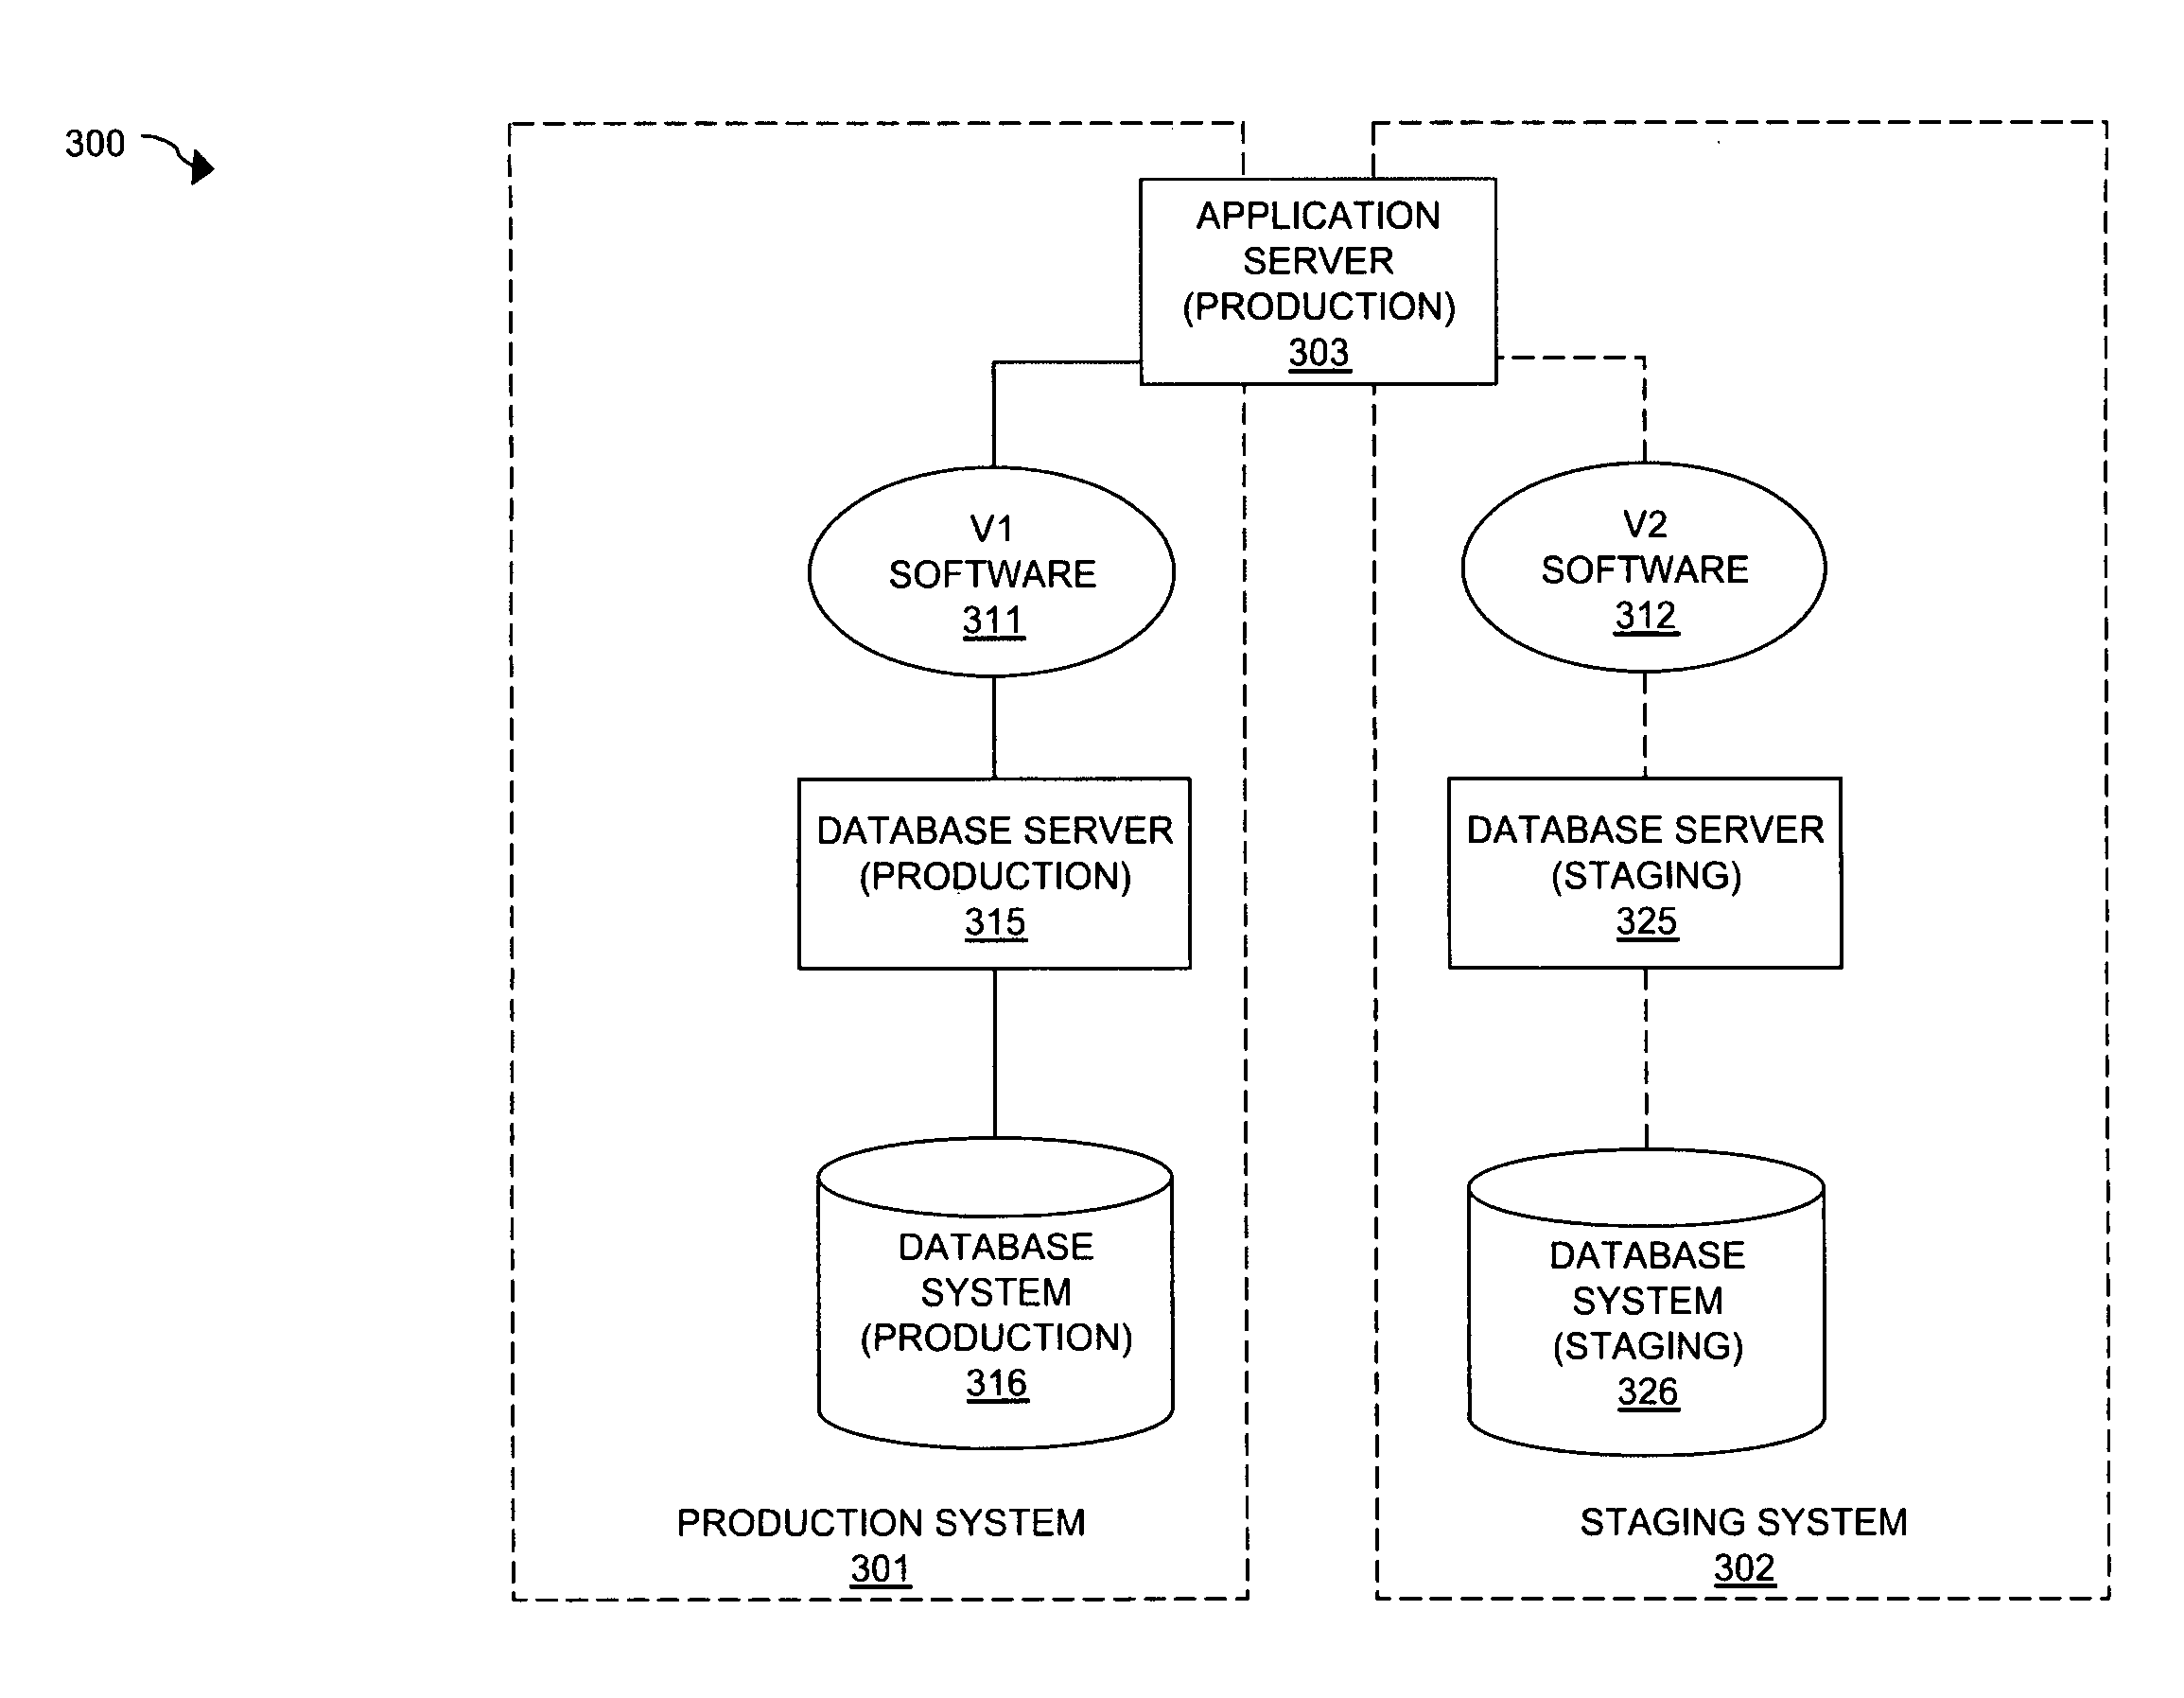 Application server production software upgrading with high availability staging software